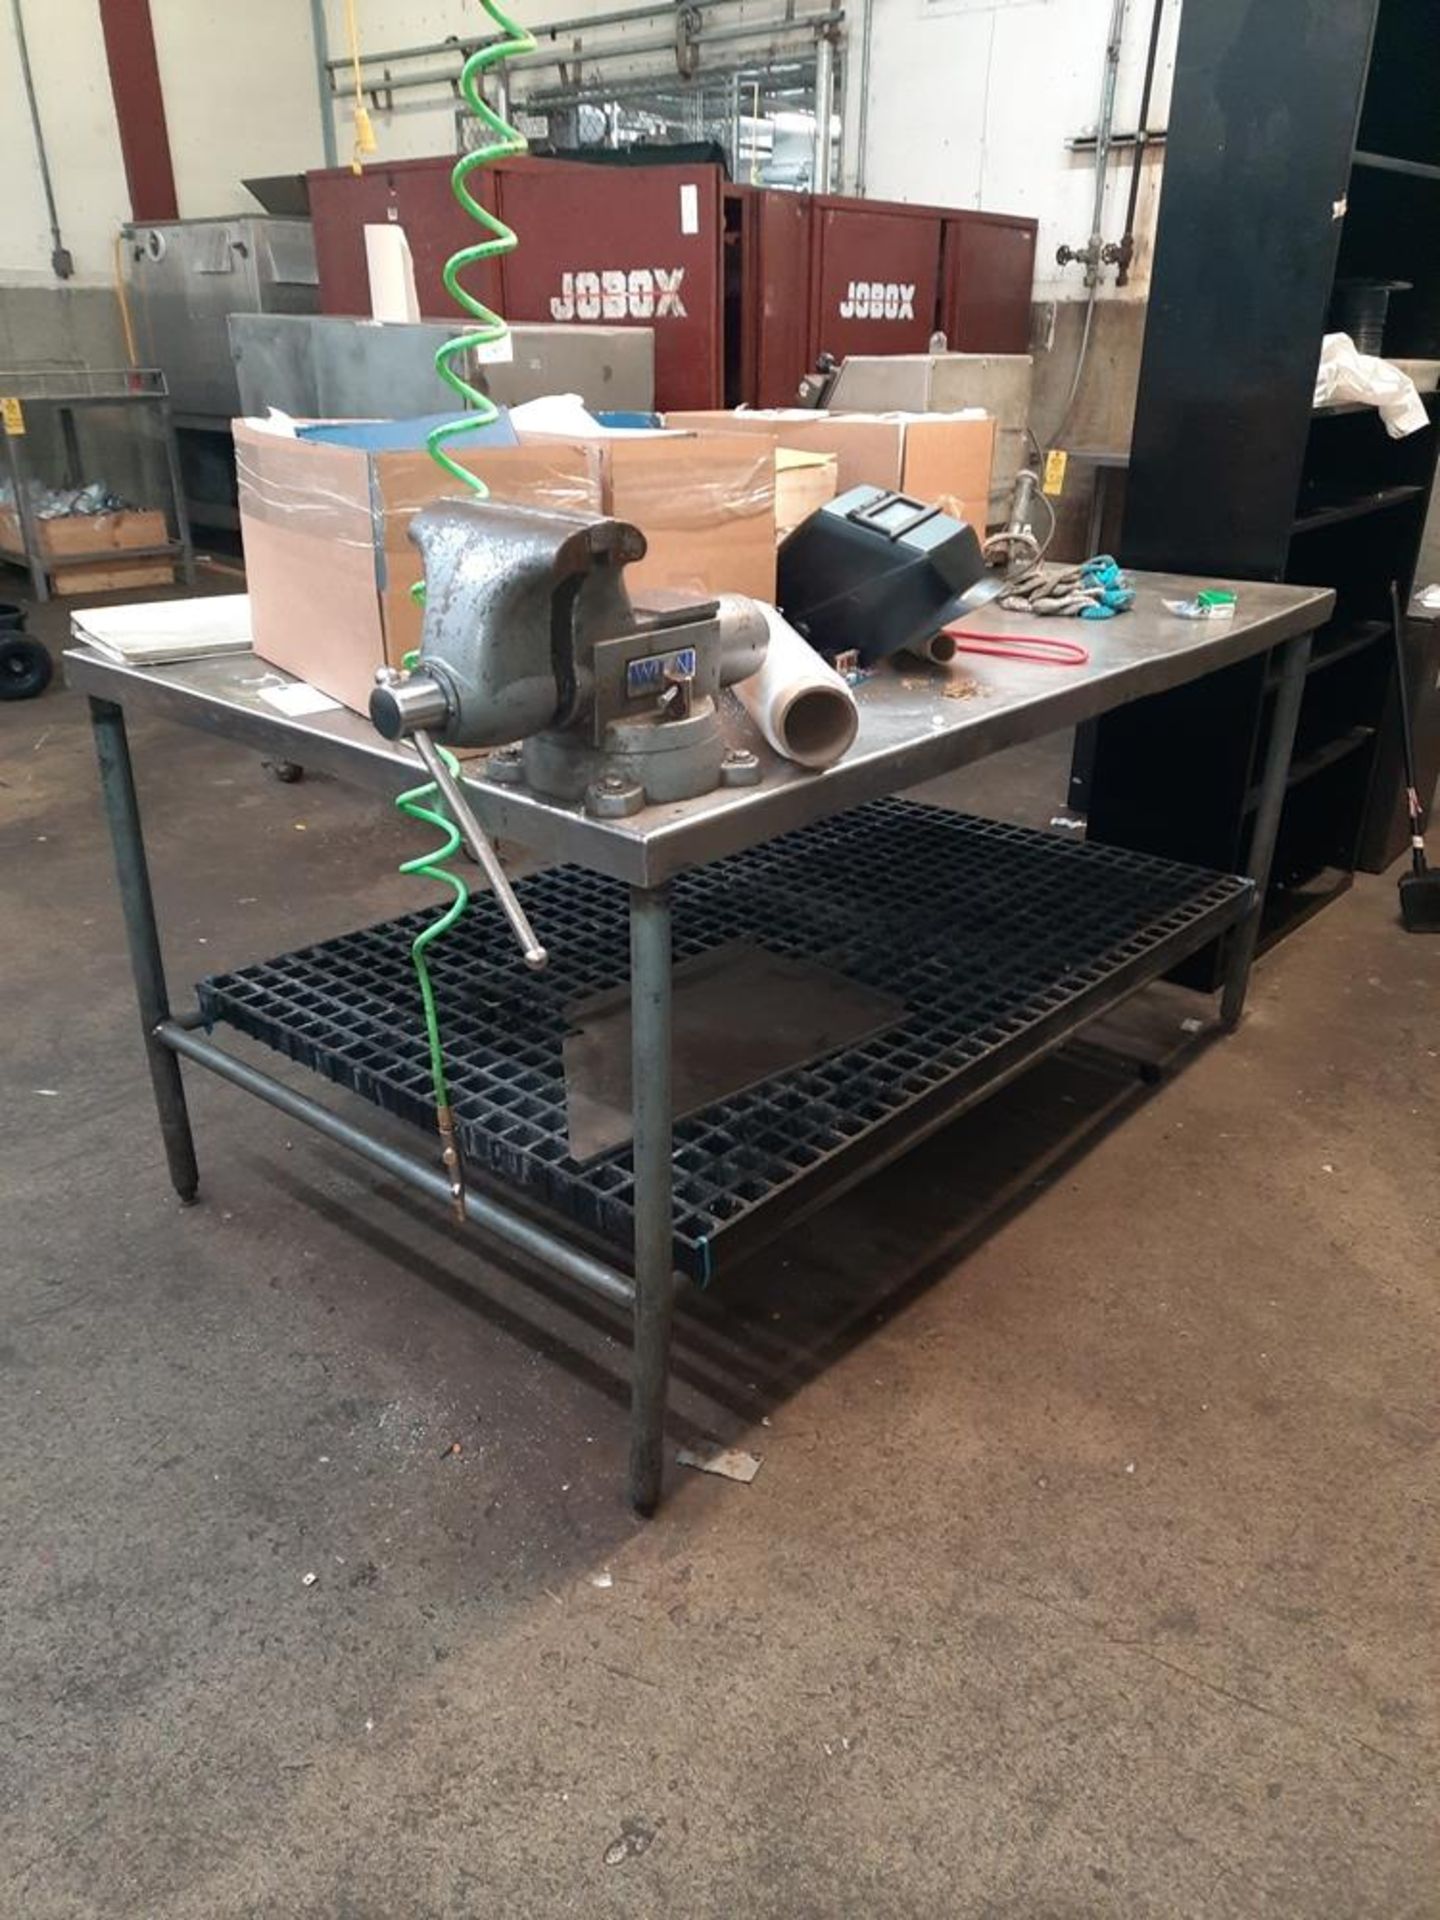 Stainless Steel Table, 44" W X 6' L with vise: Required Loading Fee $100.00, Rigger-Norm Pavlish,